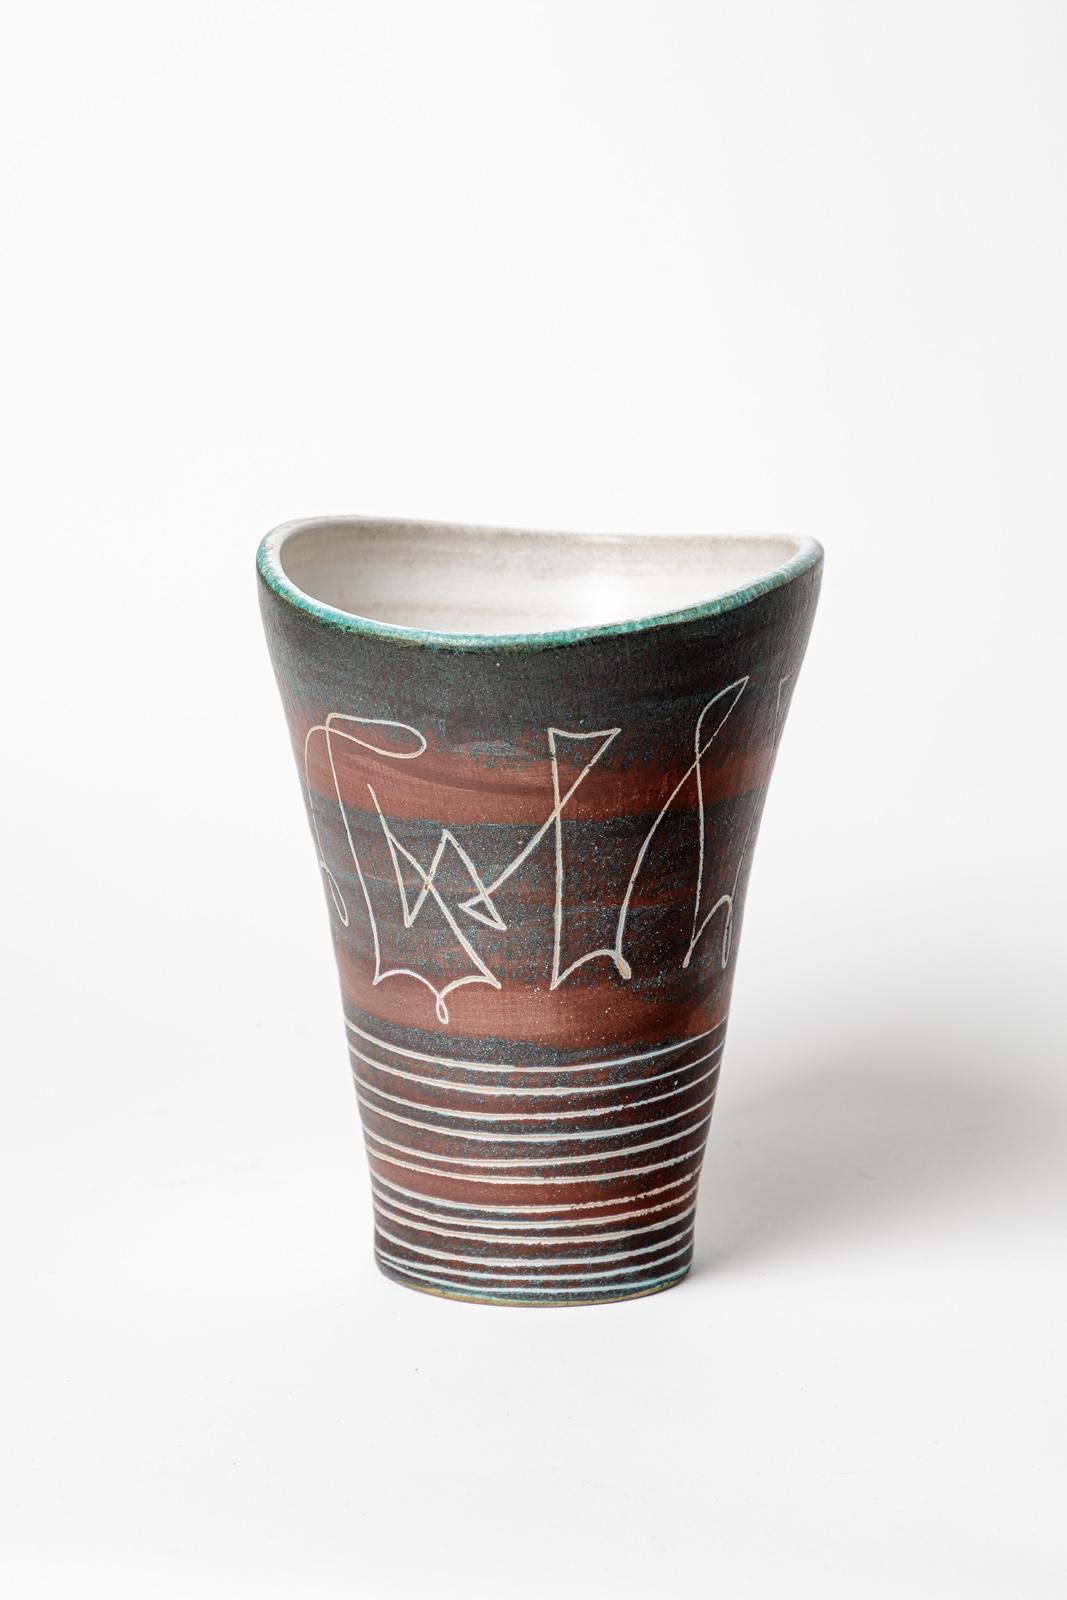 French large abstract 20th century ceramic vase by Jean Austruy circa 1950 vallauris For Sale